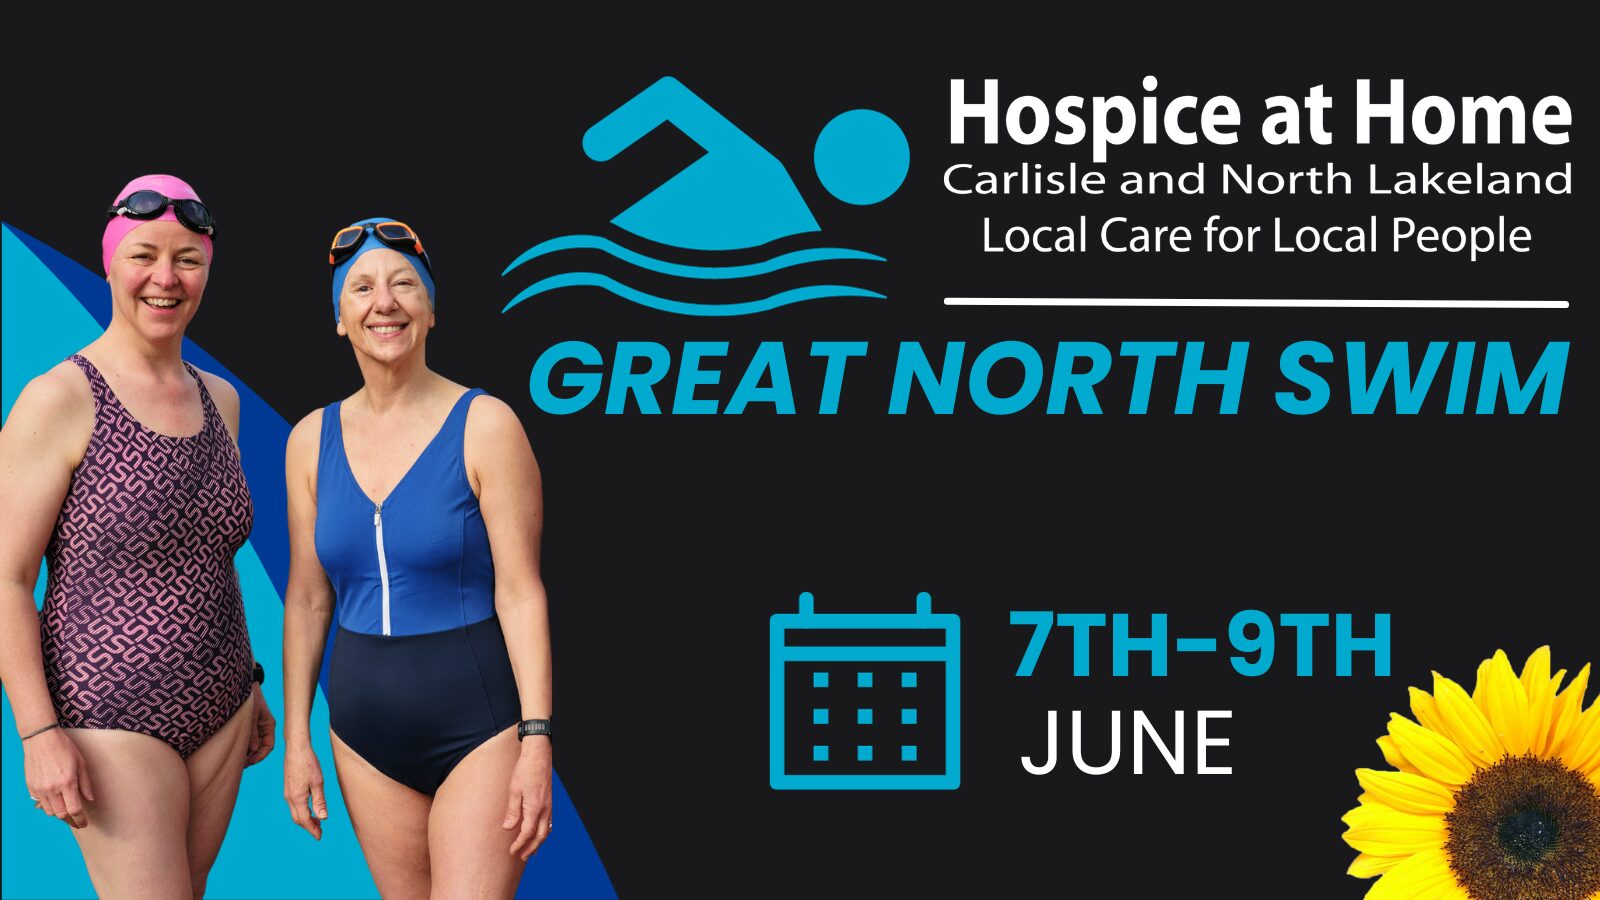 Great North Swim Advert. Two ladies in swimming costumes